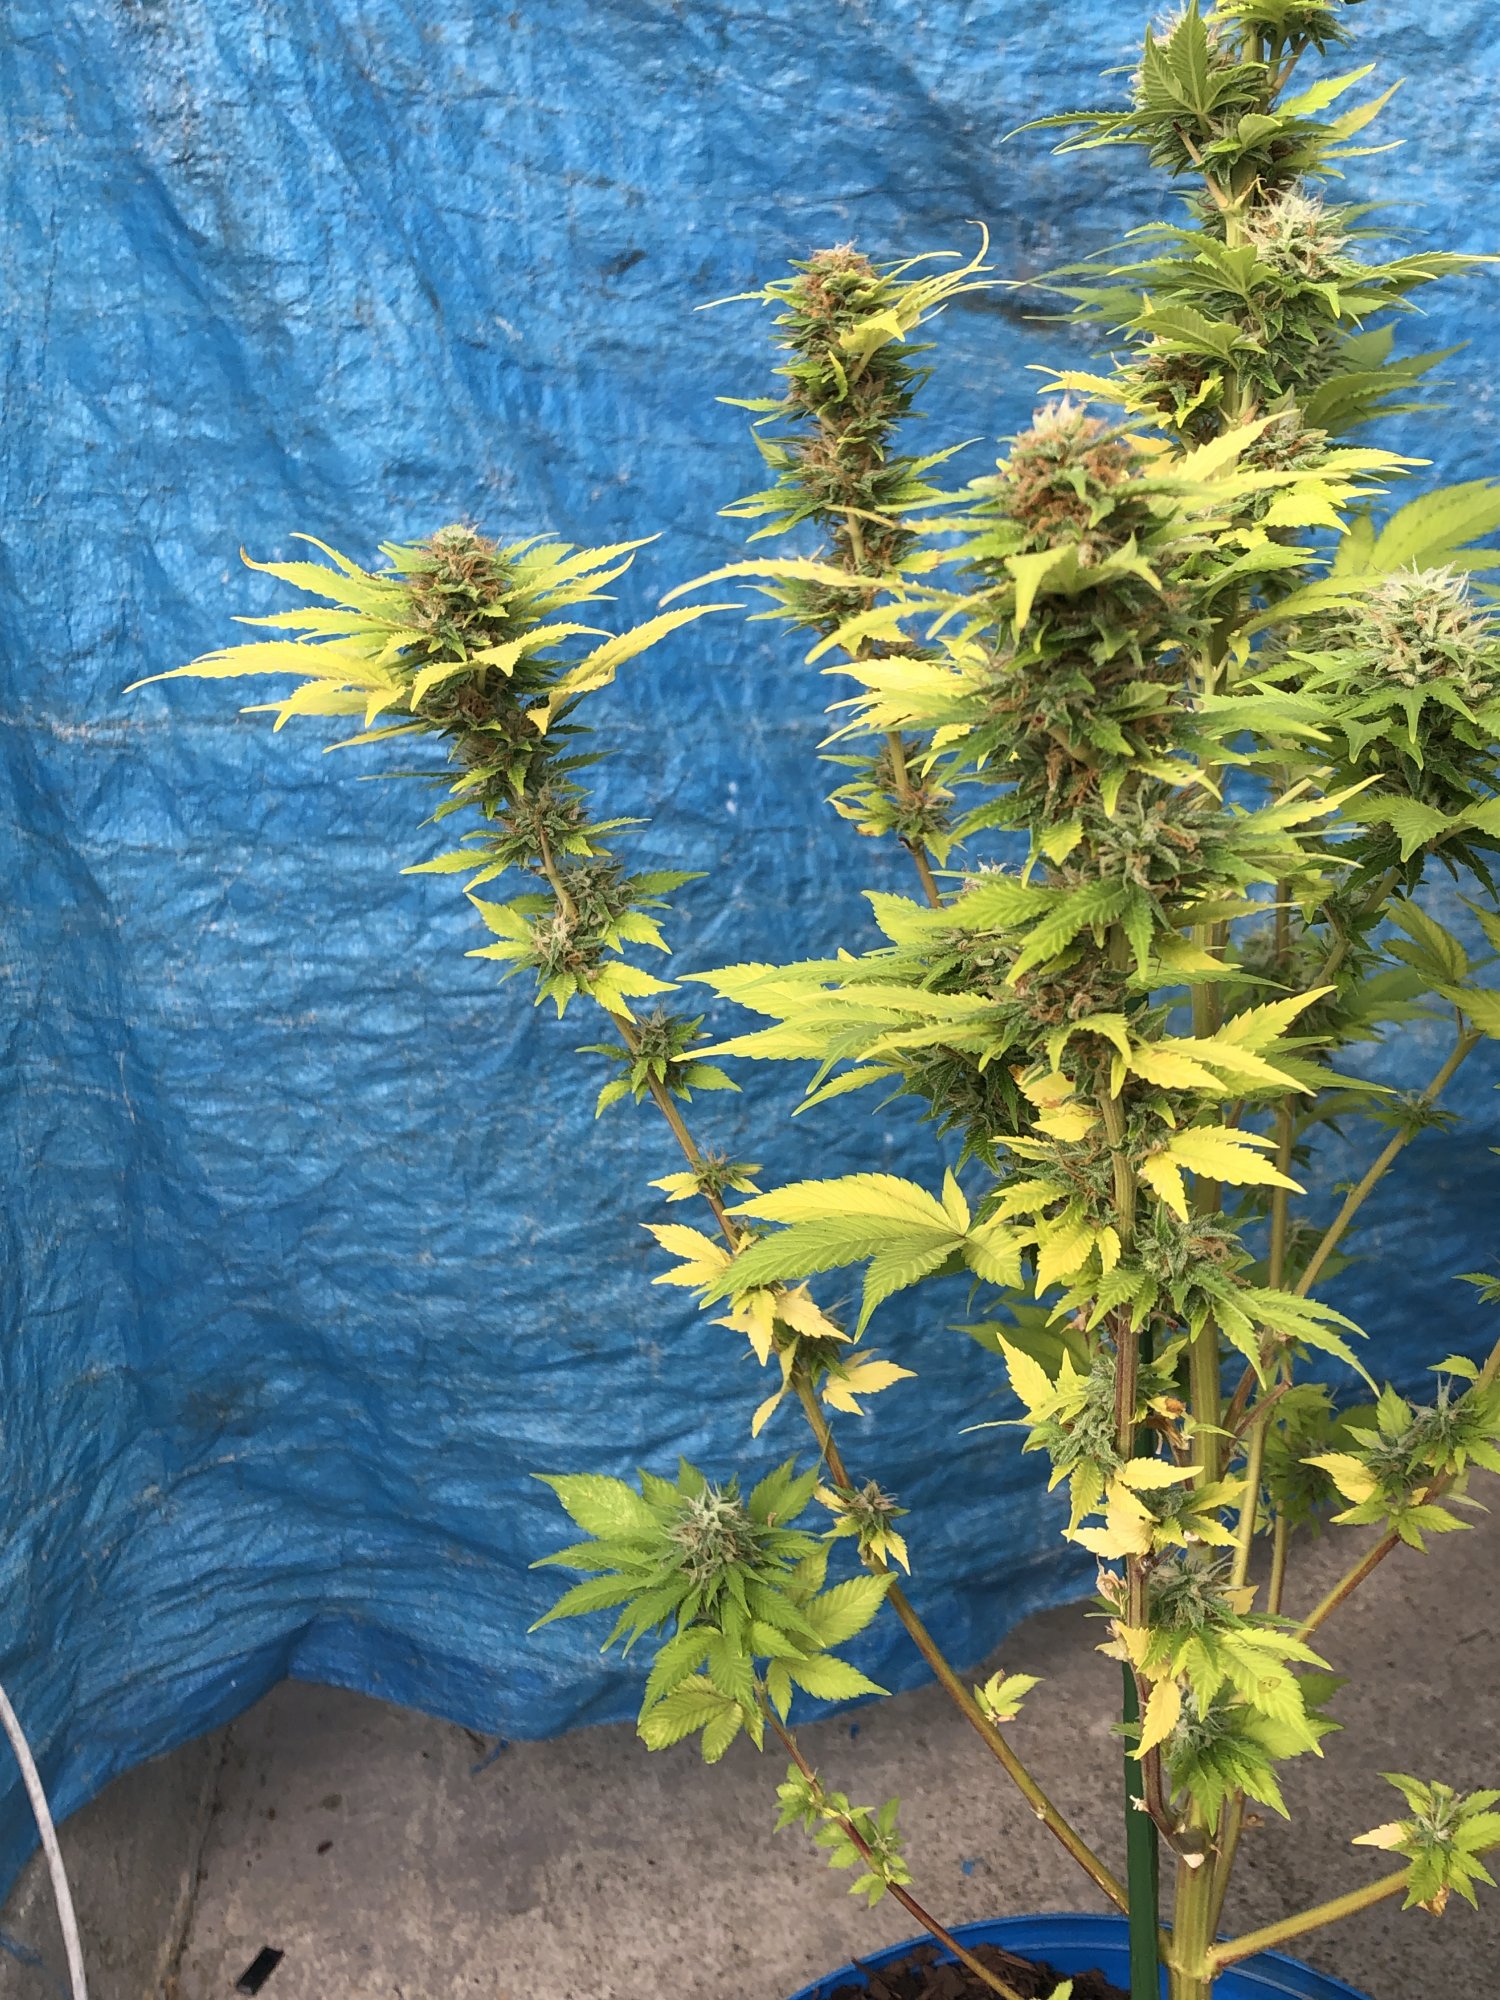 New grower need some guidance